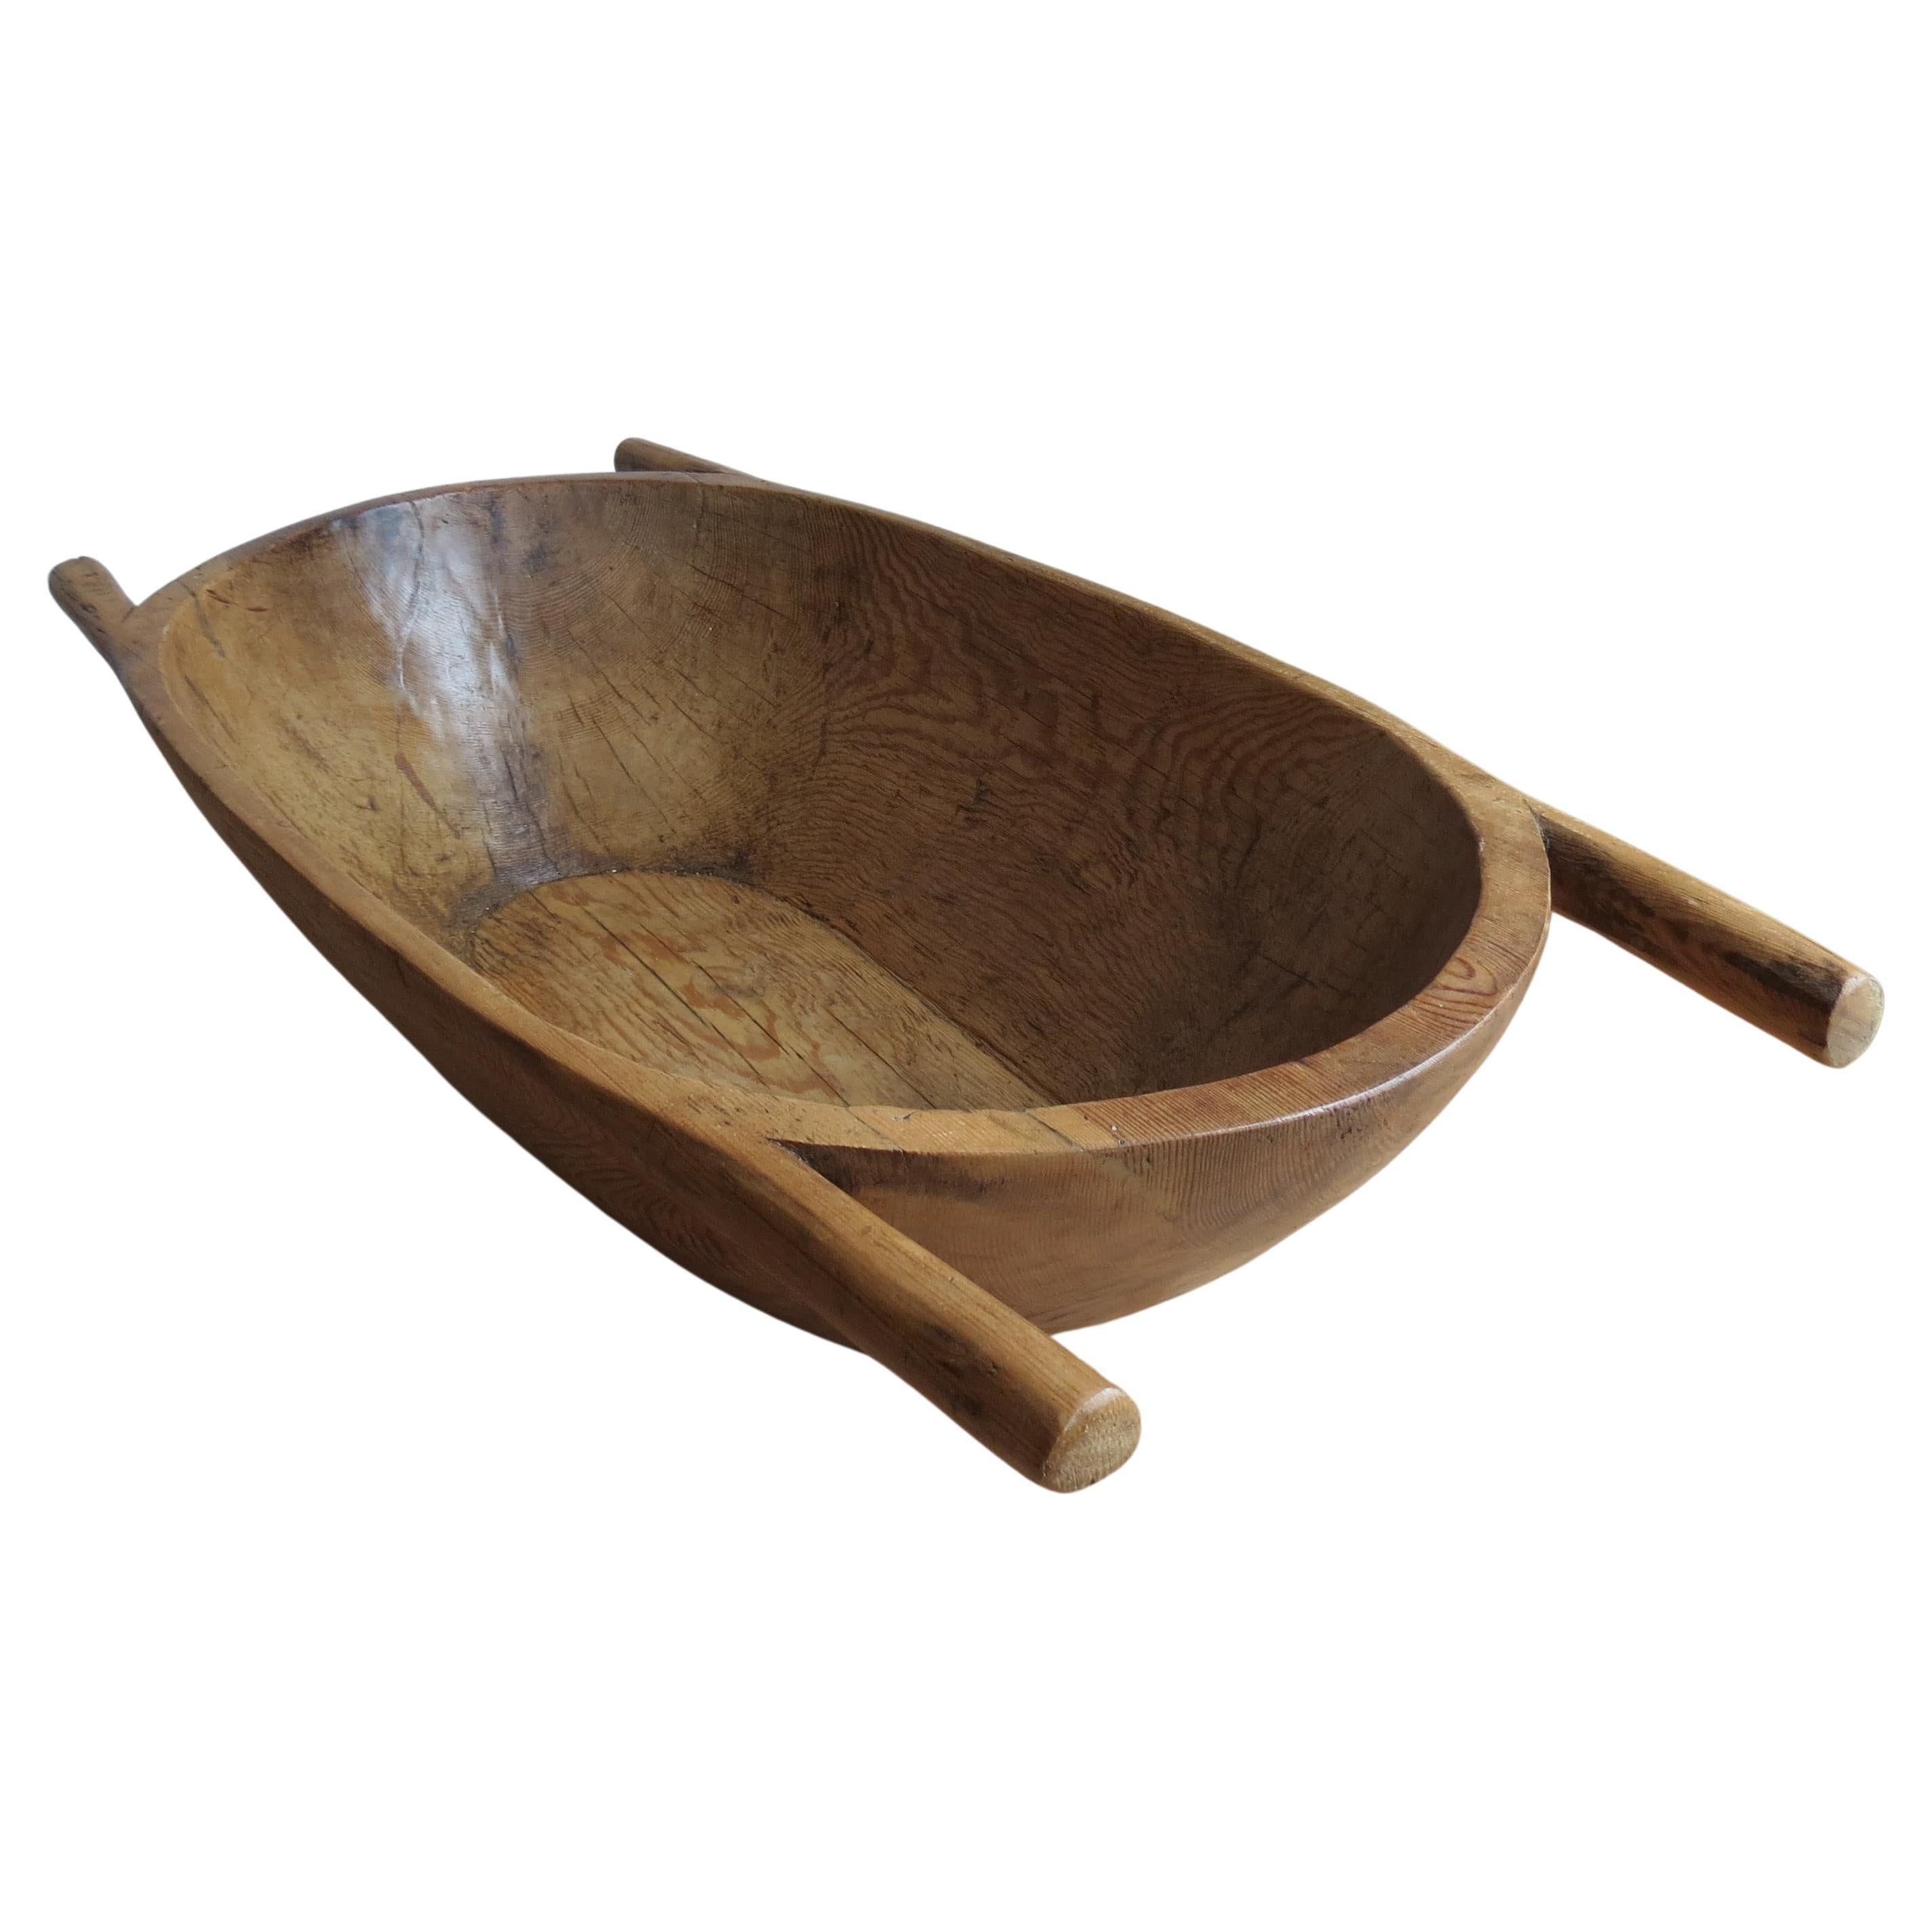 Very Large Pine Trug Wooden Rustic Bowl with Handles Wabi Sabi Style For Sale